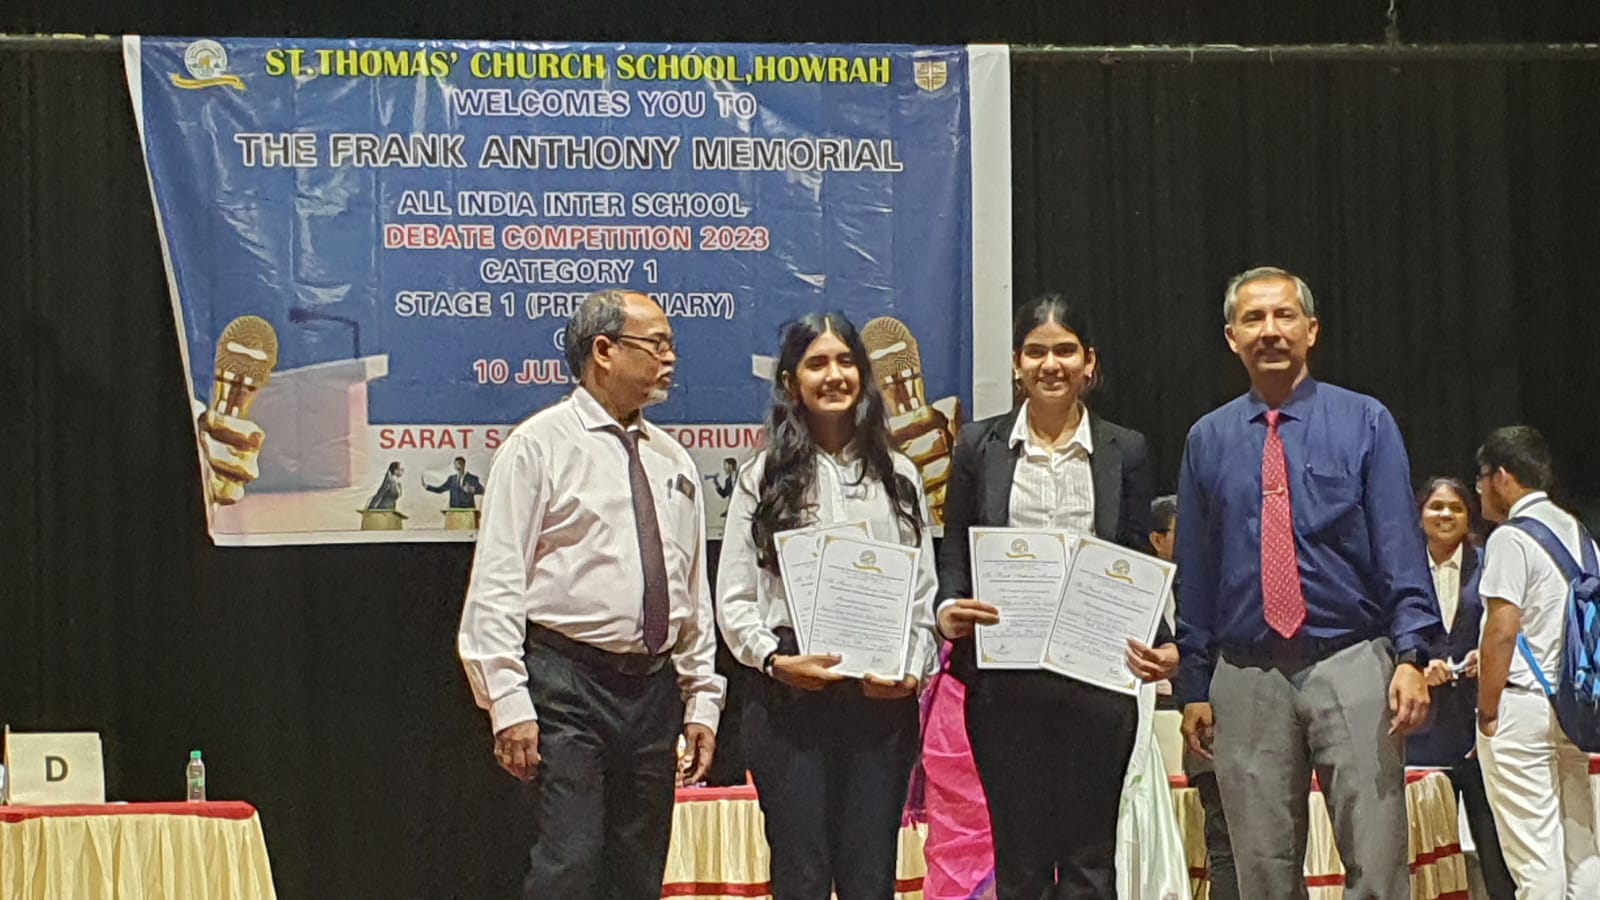 FRANK ANTHONY MEMORIAL ALL INDIA INTER-SCHOOL DEBATE COMPETITION 2023